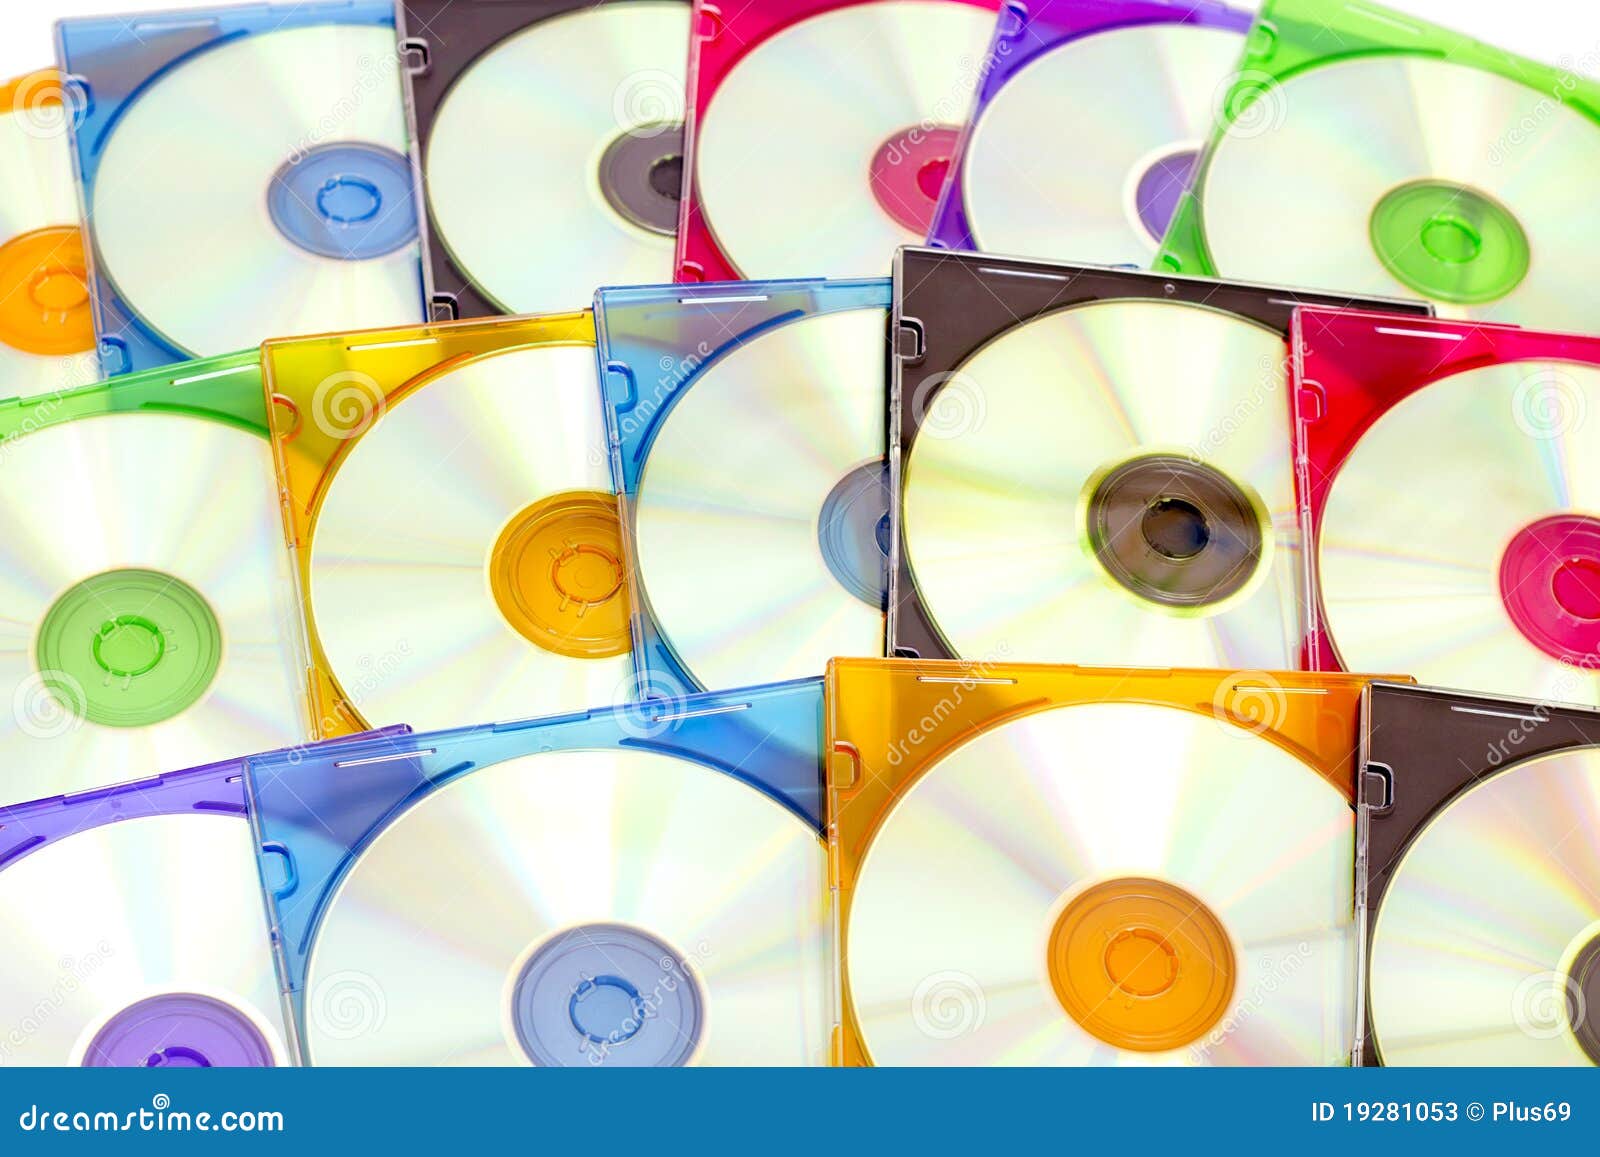 Colorful CDs in boxes stock image. Image of colorful - 19281053